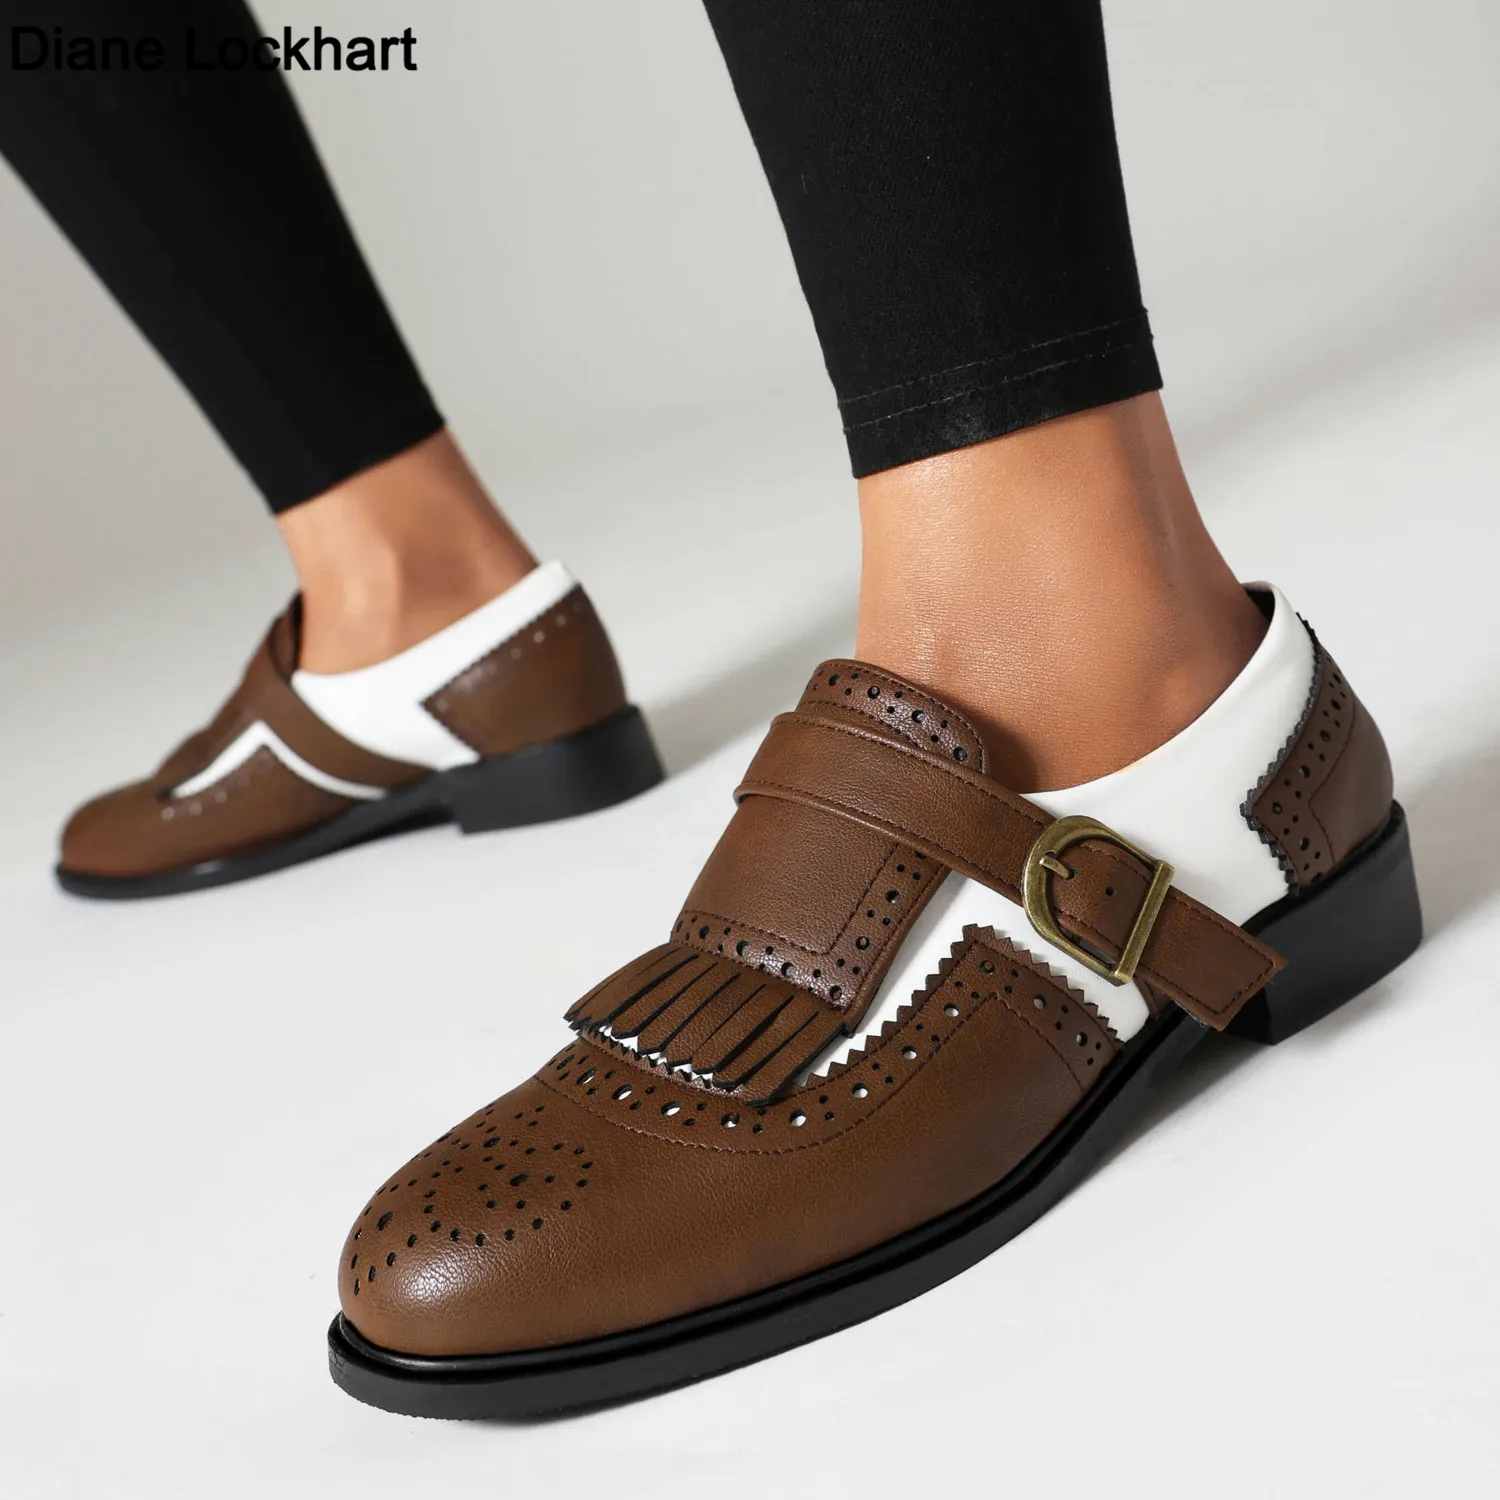 

Fashion Spring Autumn Oxford Flats Woman Lace-up Round Toe Loafers Buckle Tassel Leather Derby British Ladies Thick Heel Shoes